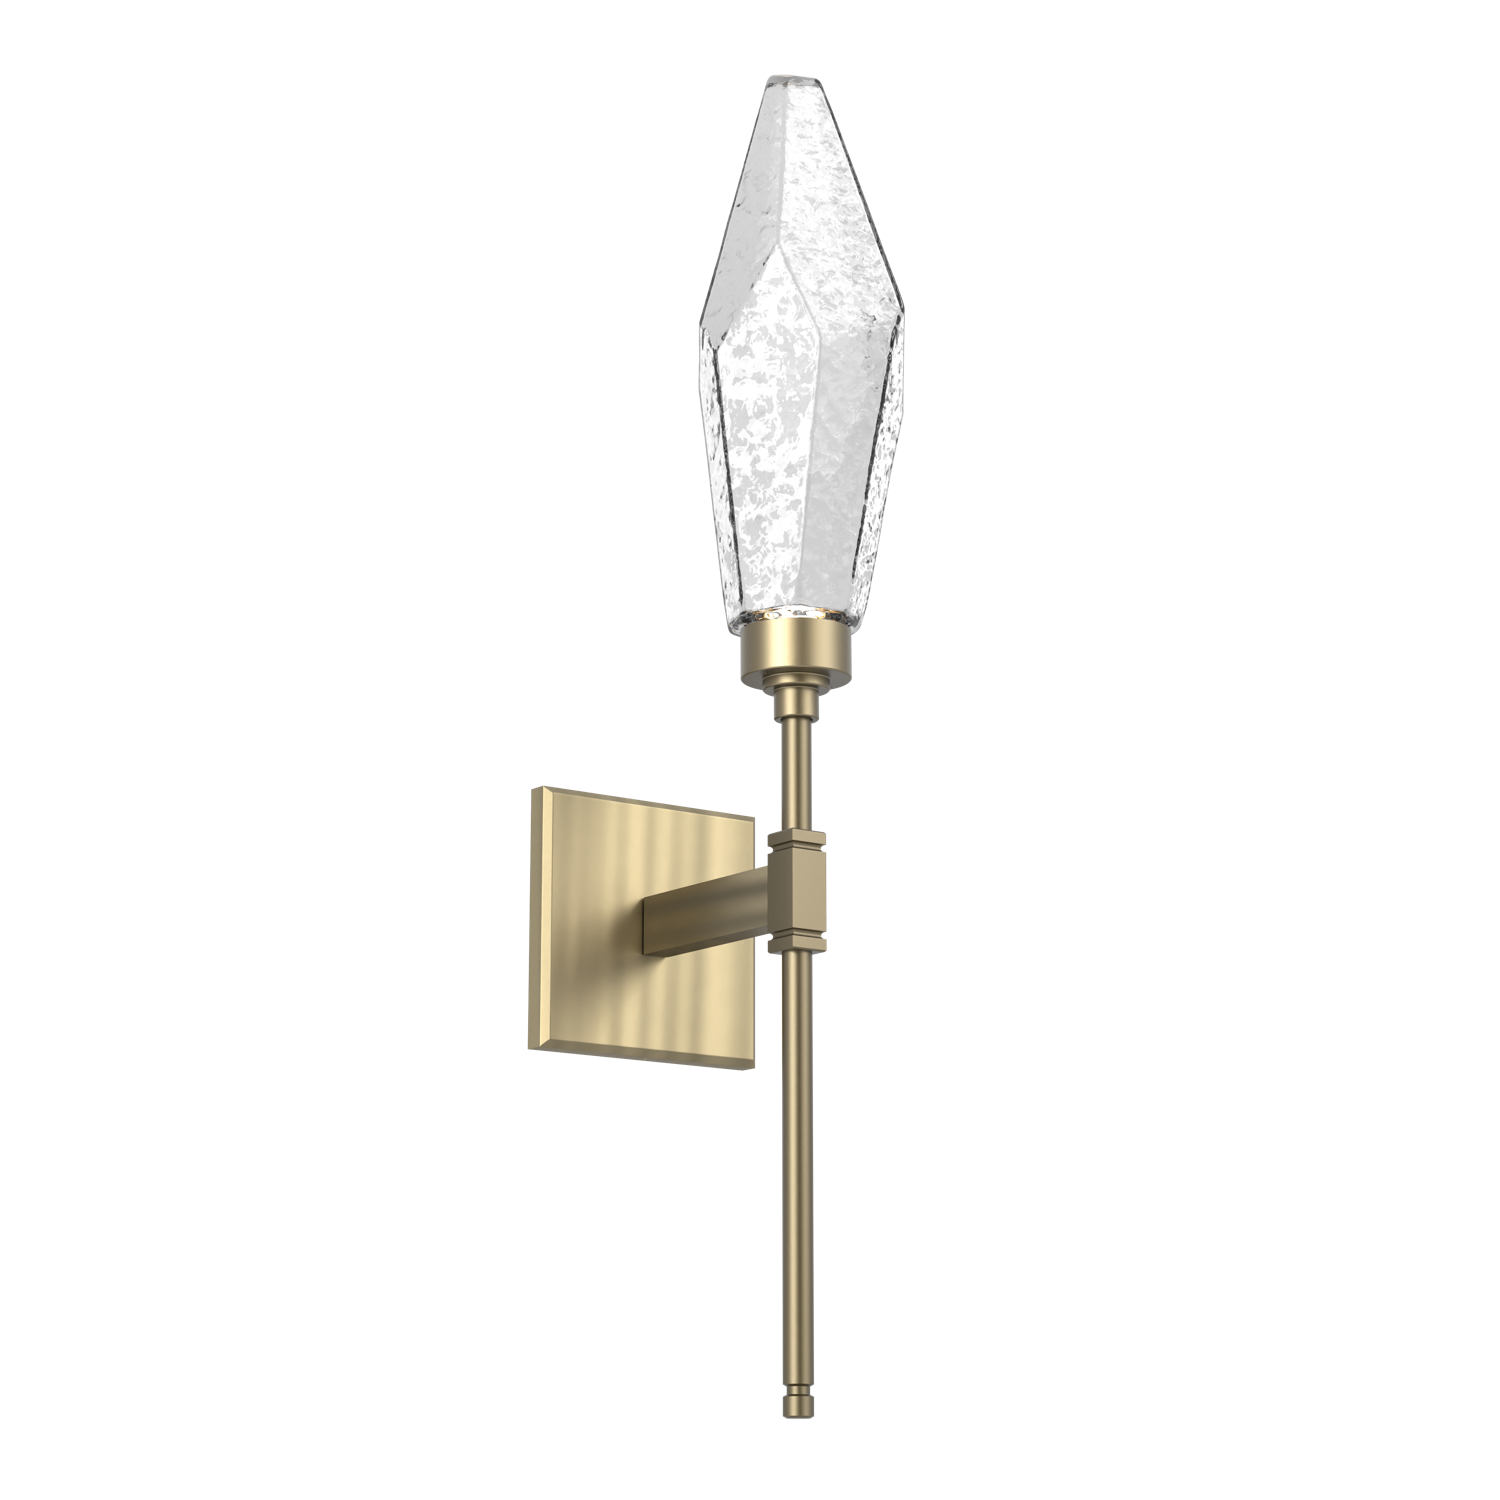 IDB0050-07-HB-CC-Hammerton-Studio-Rock-Crystal-belvedere-wall-sconce-with-heritage-brass-finish-and-clear-glass-shades-and-LED-lamping